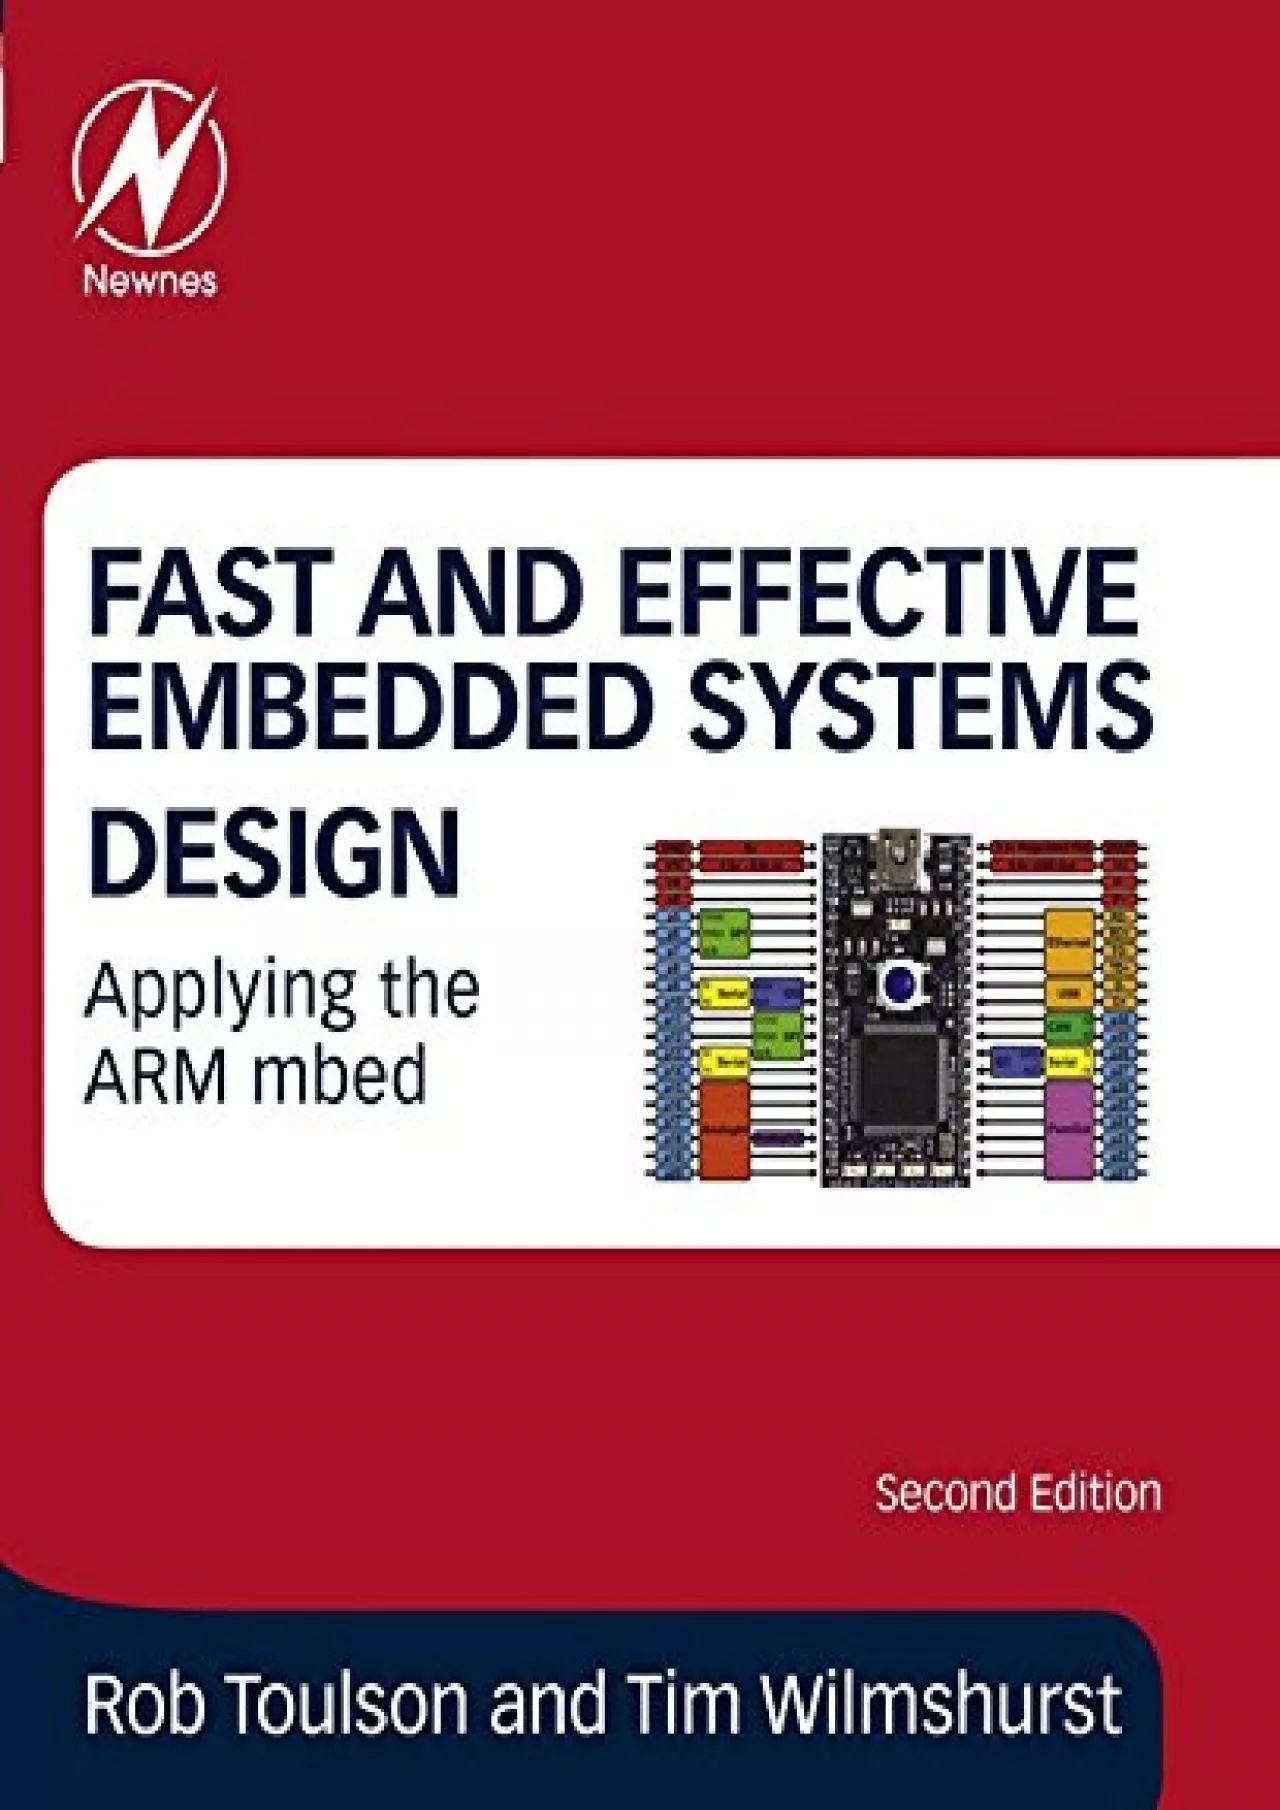 [FREE]-Fast and Effective Embedded Systems Design: Applying the ARM mbed